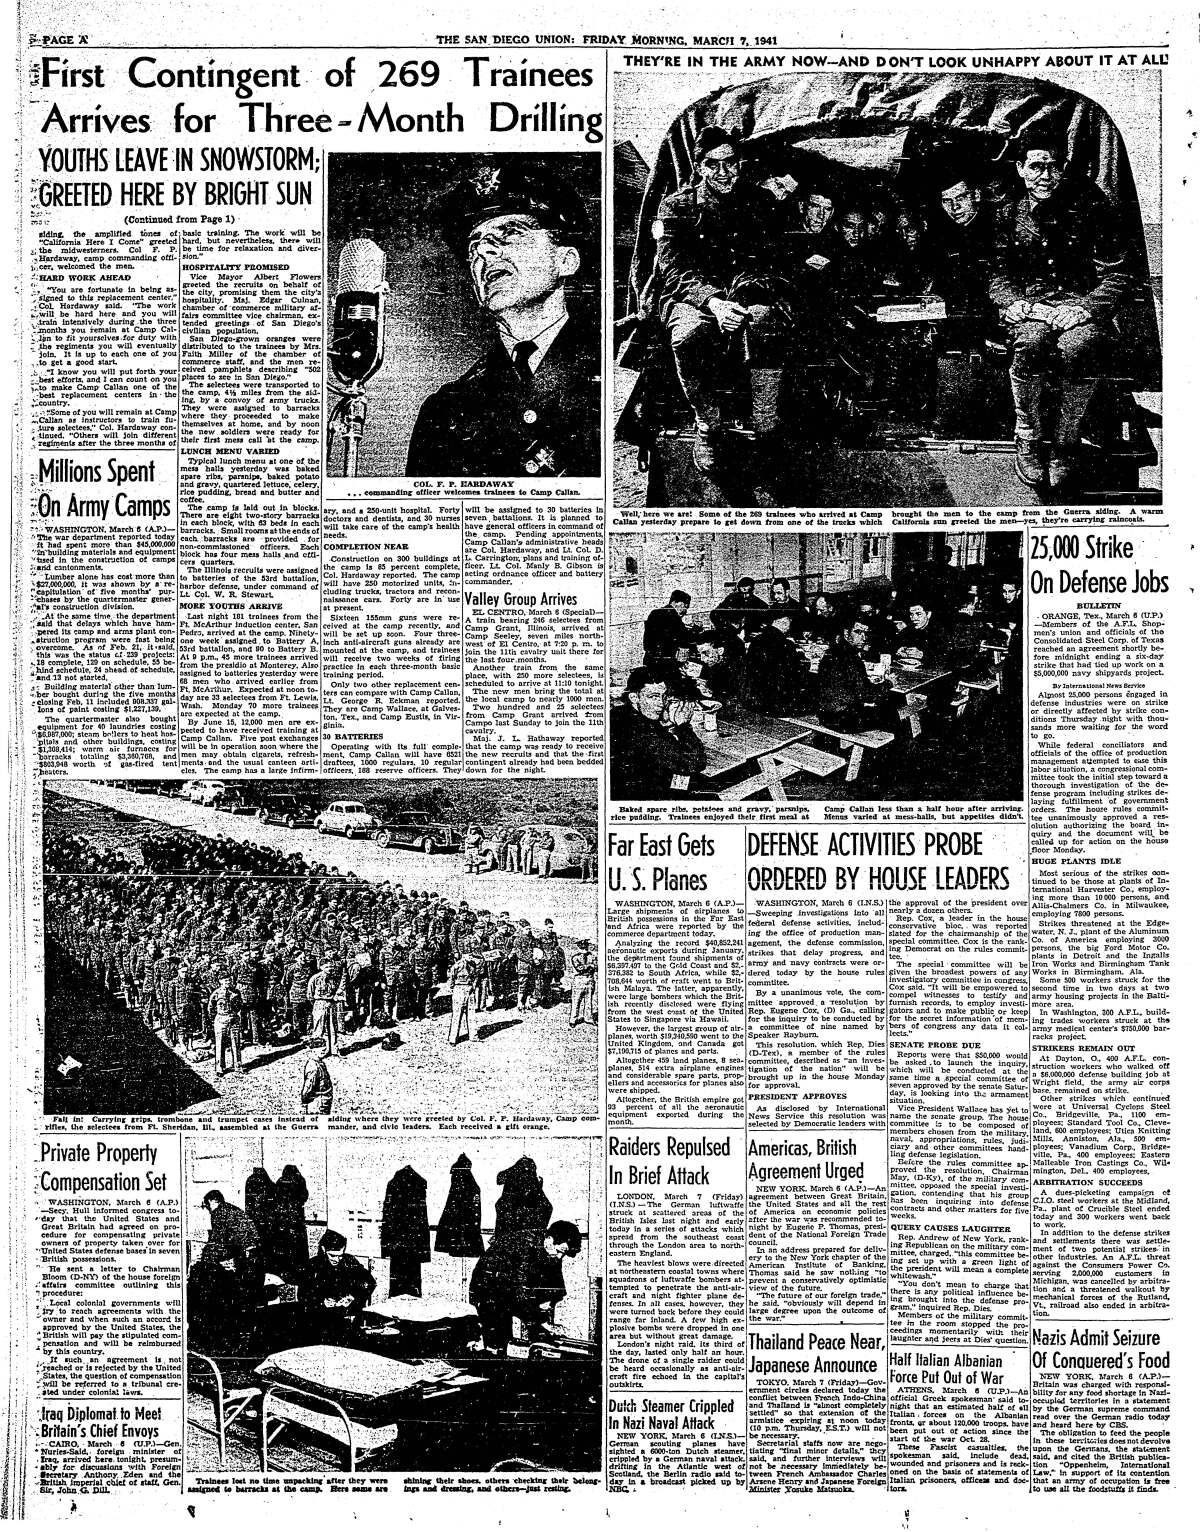 Pages from the San Diego Union newspaper